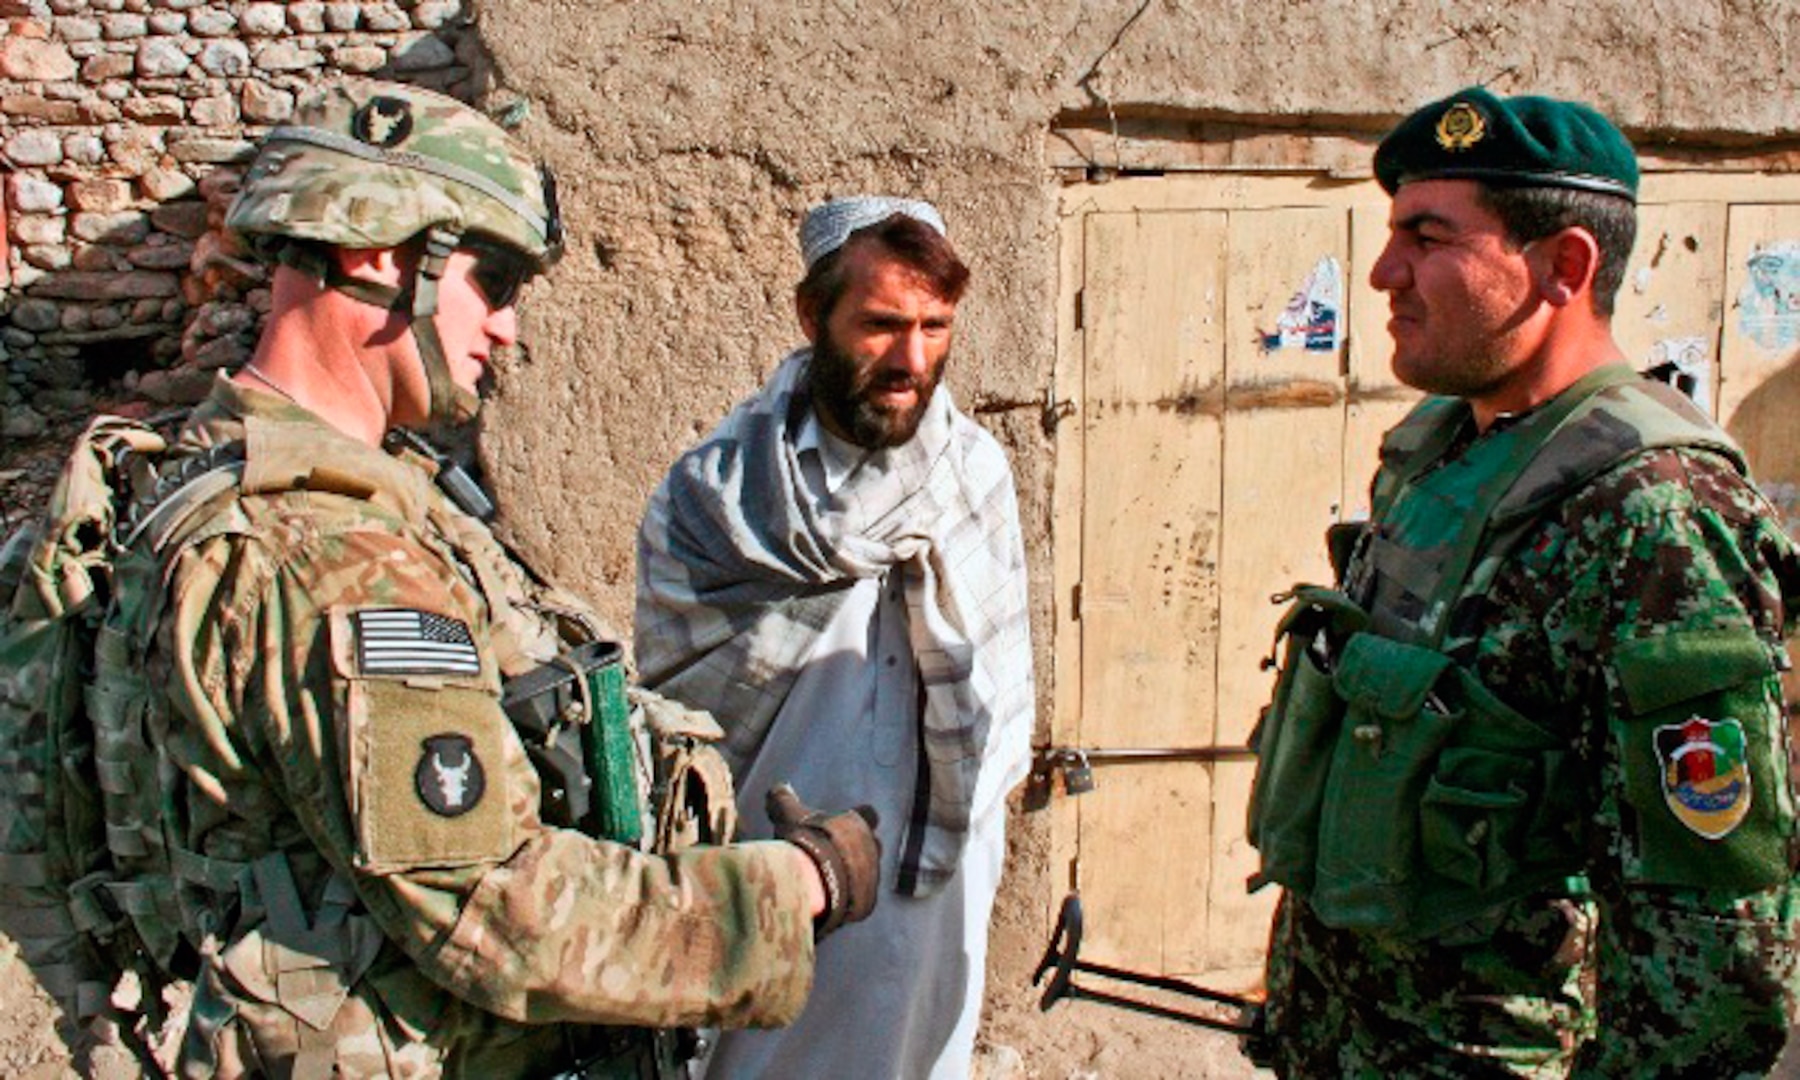 Army 1st Lt. John Dundee (left), 1st platoon leader for Company A, 1st Battalion, 133rd Infantry Regiment, and Afghan National Army Lt. Rastum (right), 1st Company, 1st Battalion, 201st ANA Regt., talk with a citizen of Ghaziabad Dec. 26.